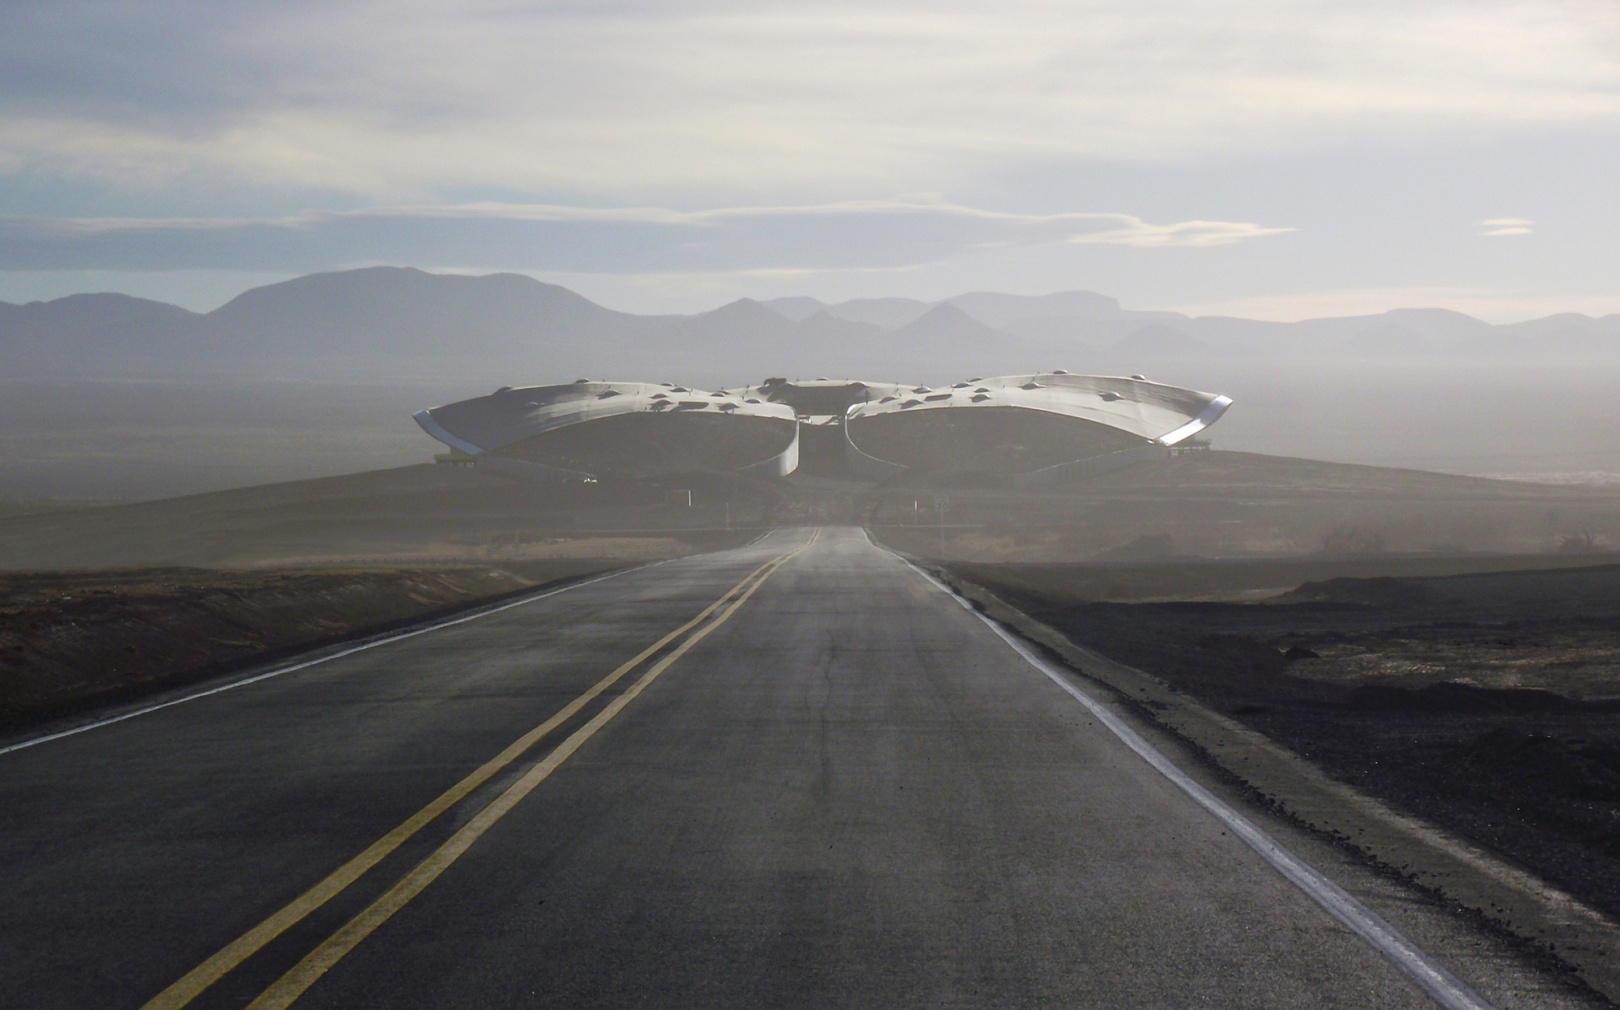 This&nbsp;road leads to Spaceport America, Virgin Galactic's Gateway to Space.